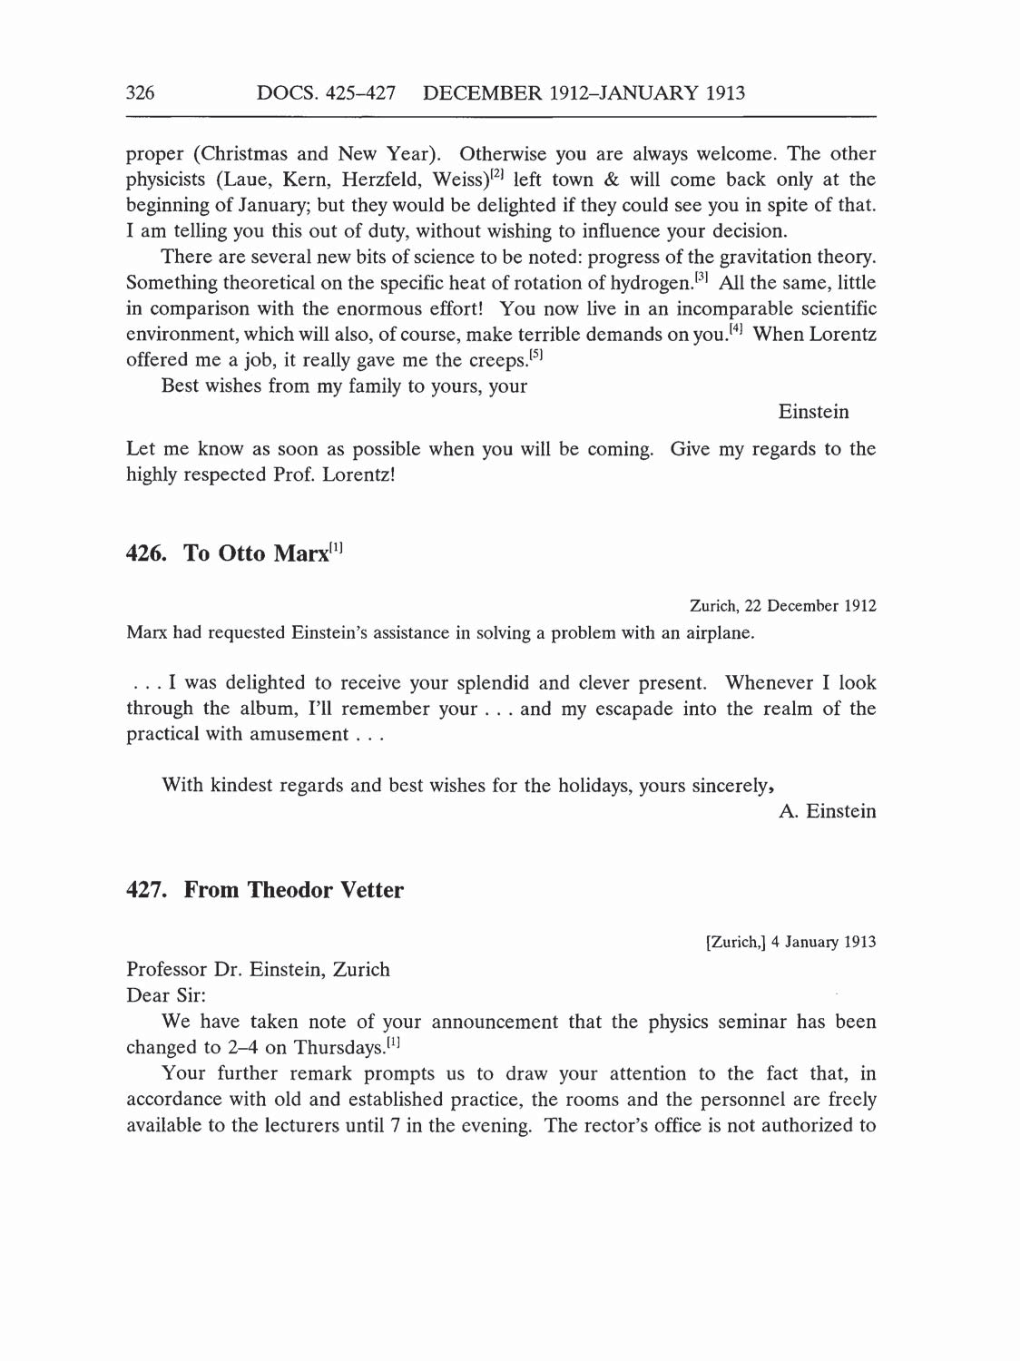 Volume 5: The Swiss Years: Correspondence, 1902-1914 (English translation supplement) page 326